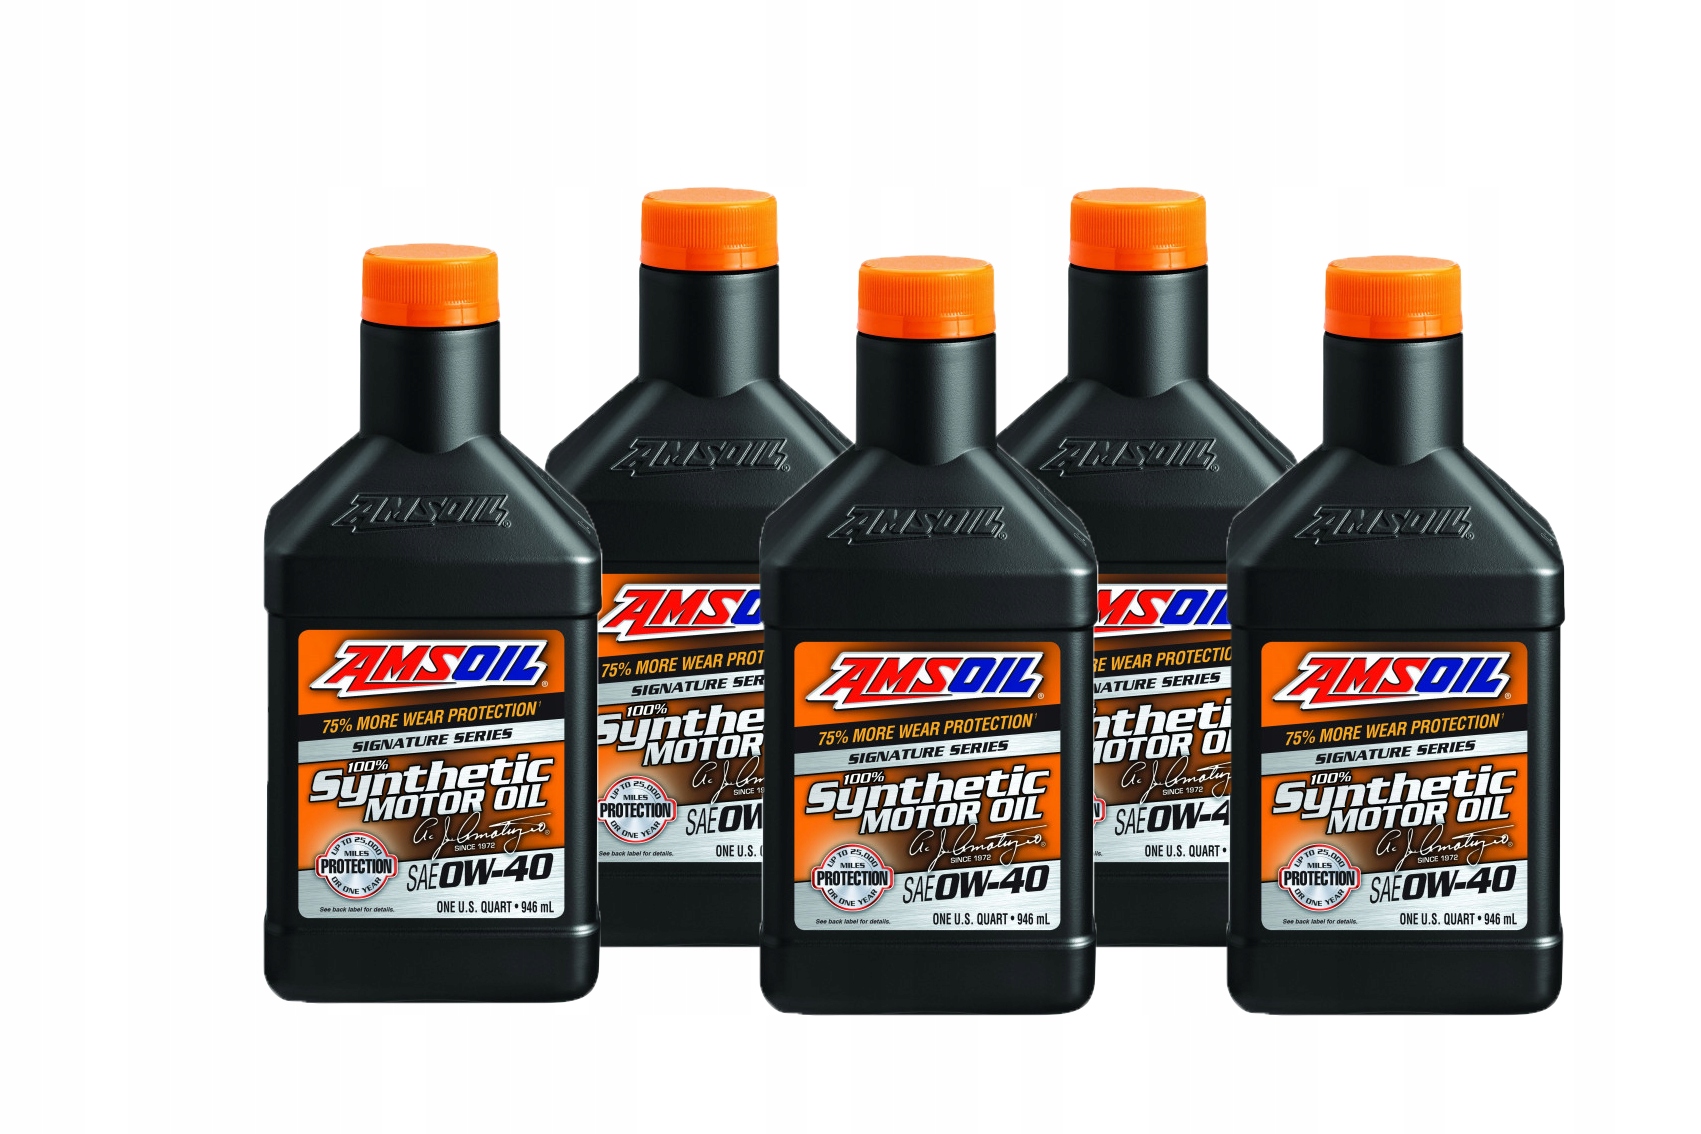 Amsoil signature series synthetic. AMSOIL Signature Series 100% Synthetic 0w-20. AMSOIL Signature Series 5w-30. AMSOIL Signature Series 5w-30 артикул. Аmsoil Signature Series 100% Synthetic 5w-30.